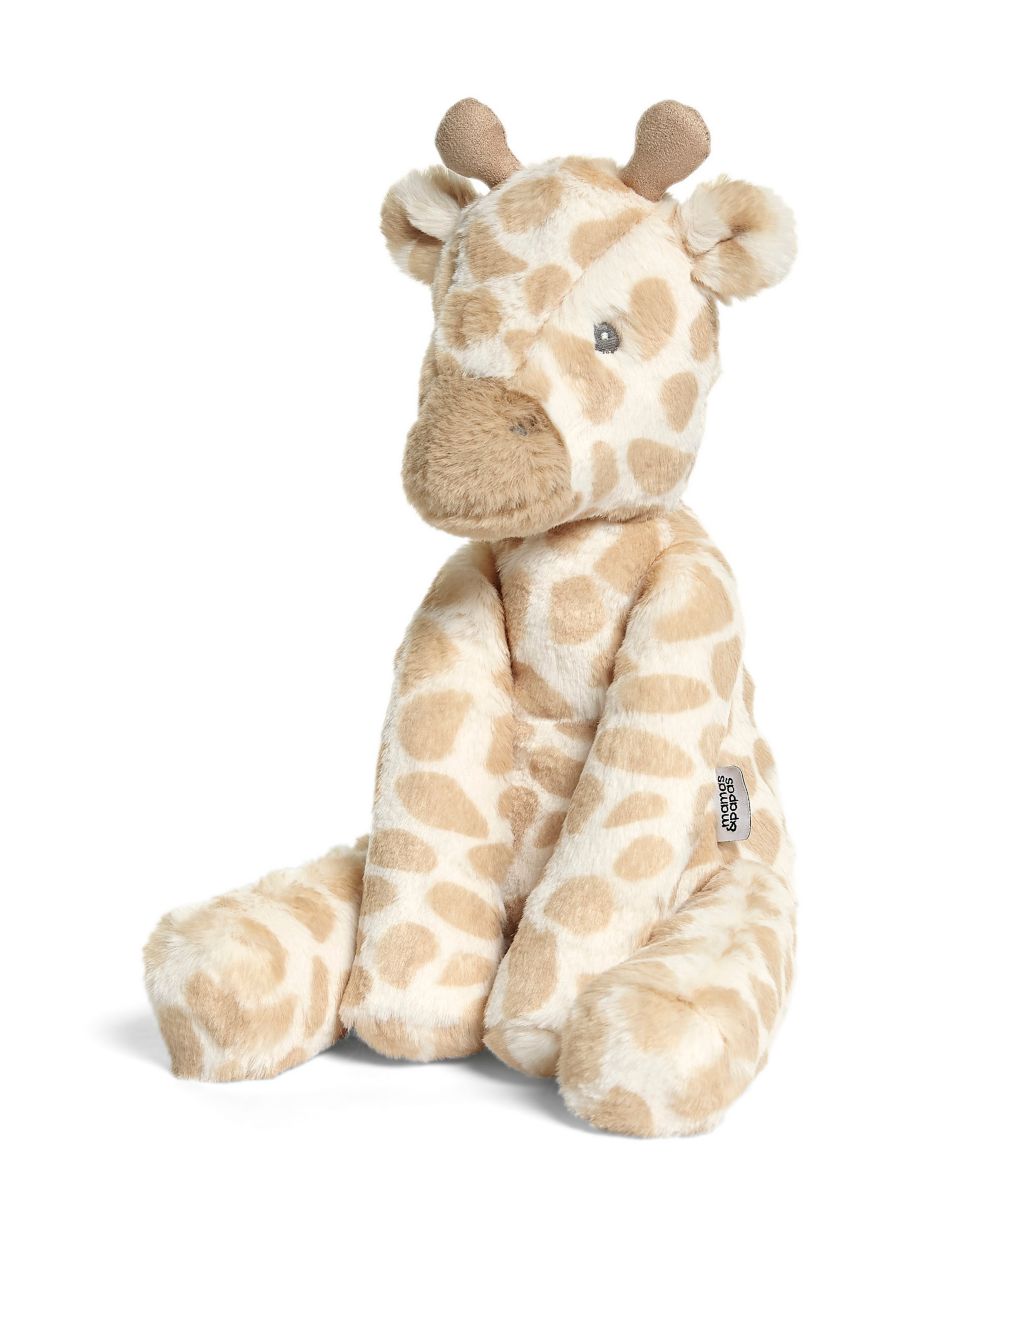 Welcome to the World Giraffe Soft Toy